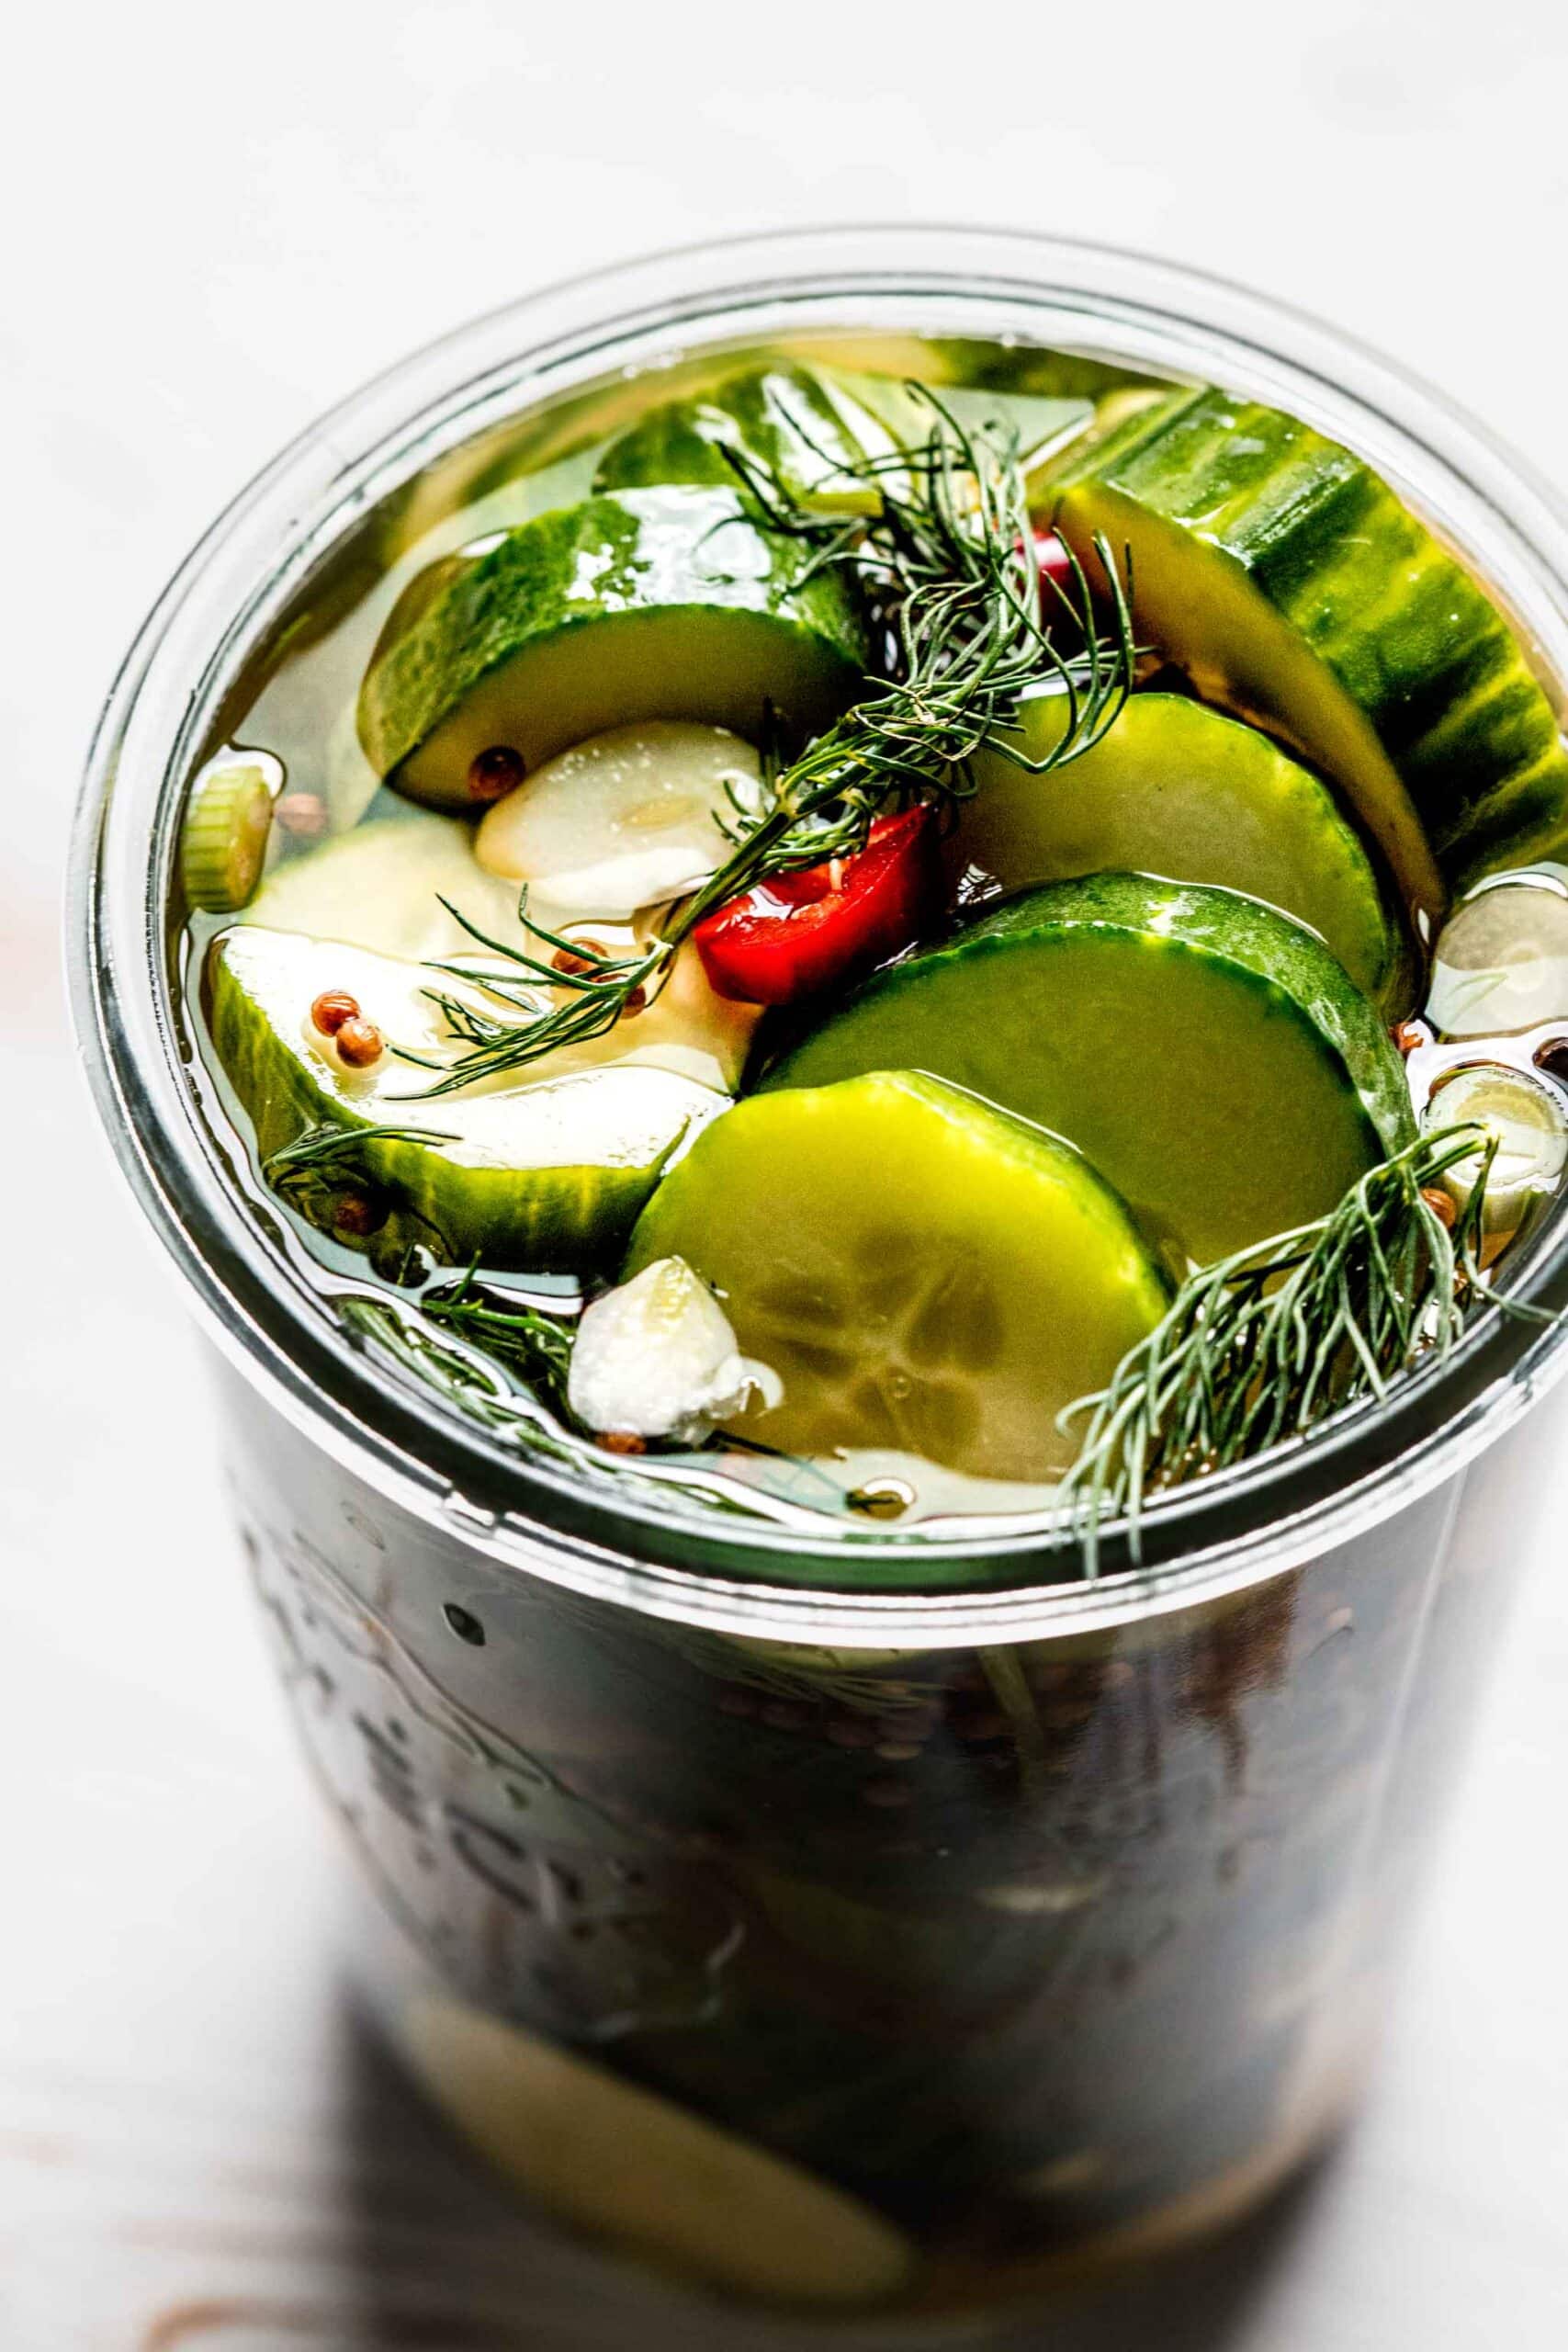 Overhead close up of prepared pickles in weck jar with dill sprigs and red pepper slices.